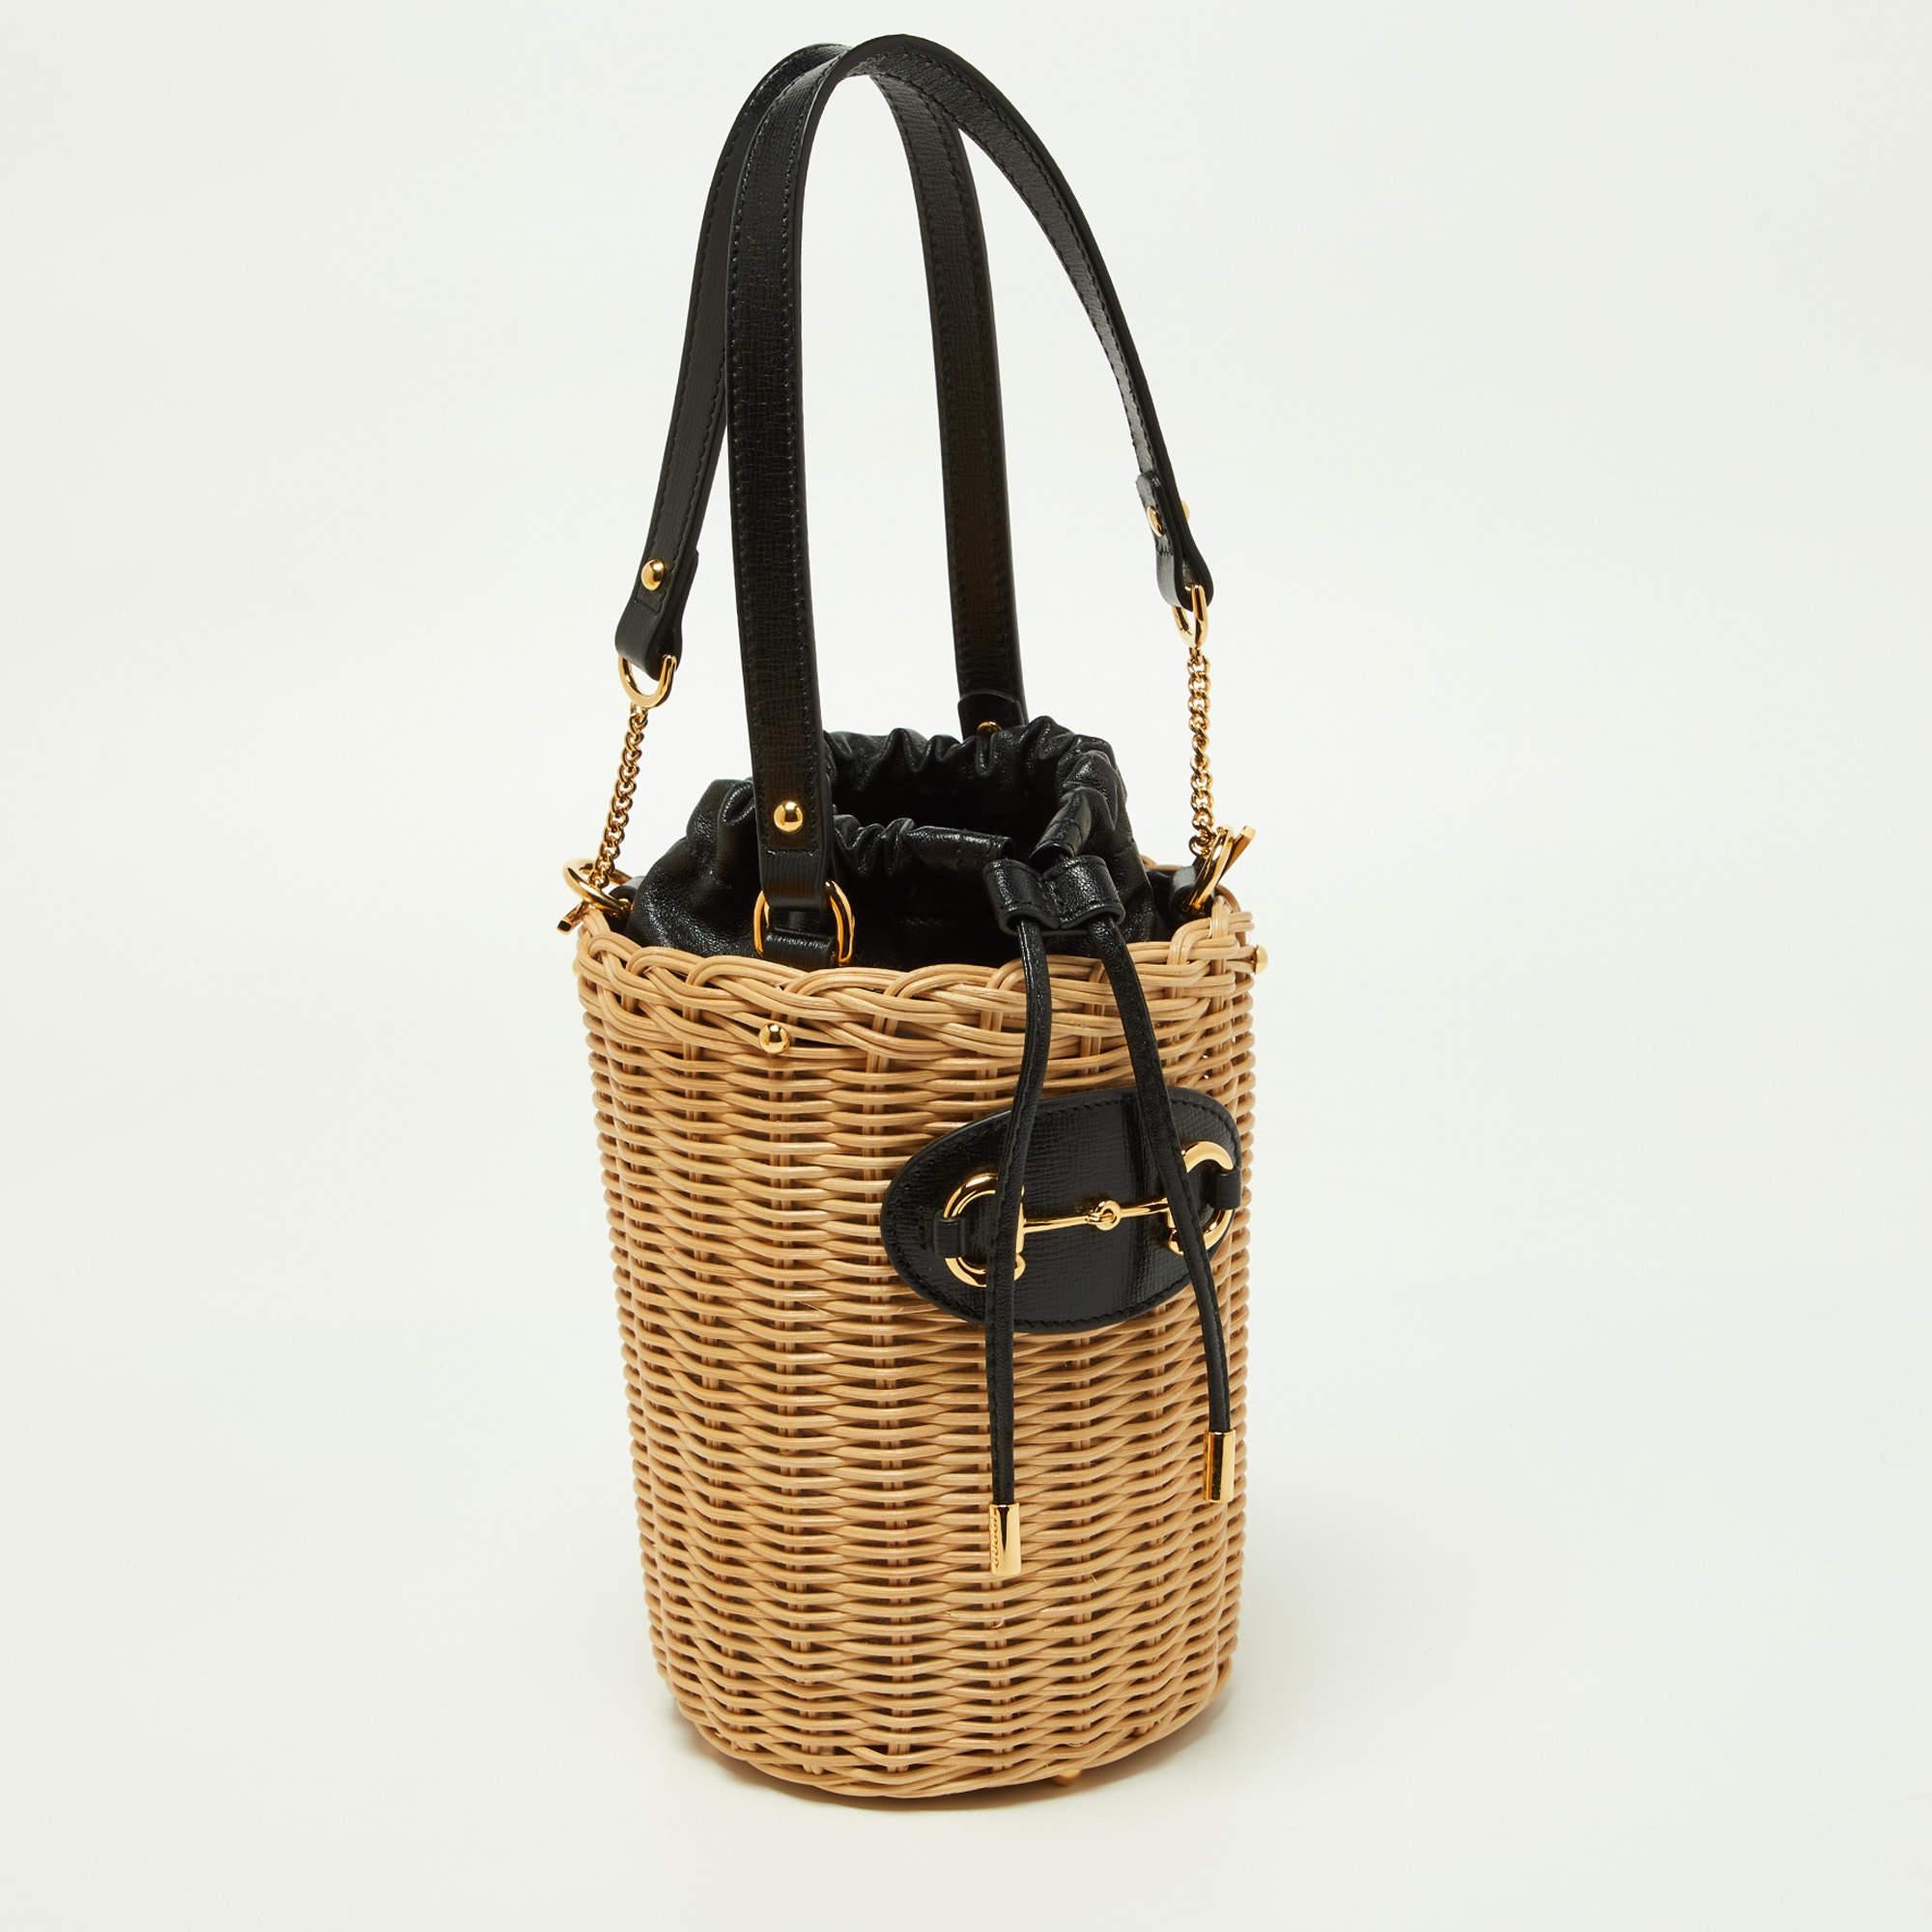 The Gucci Horsebit 1955 bucket bag is a chic and versatile accessory. Its body features beige wicker with black leather trim, adorned with the iconic Horsebit detail. The bag has a spacious interior, drawstring closure, and an adjustable leather